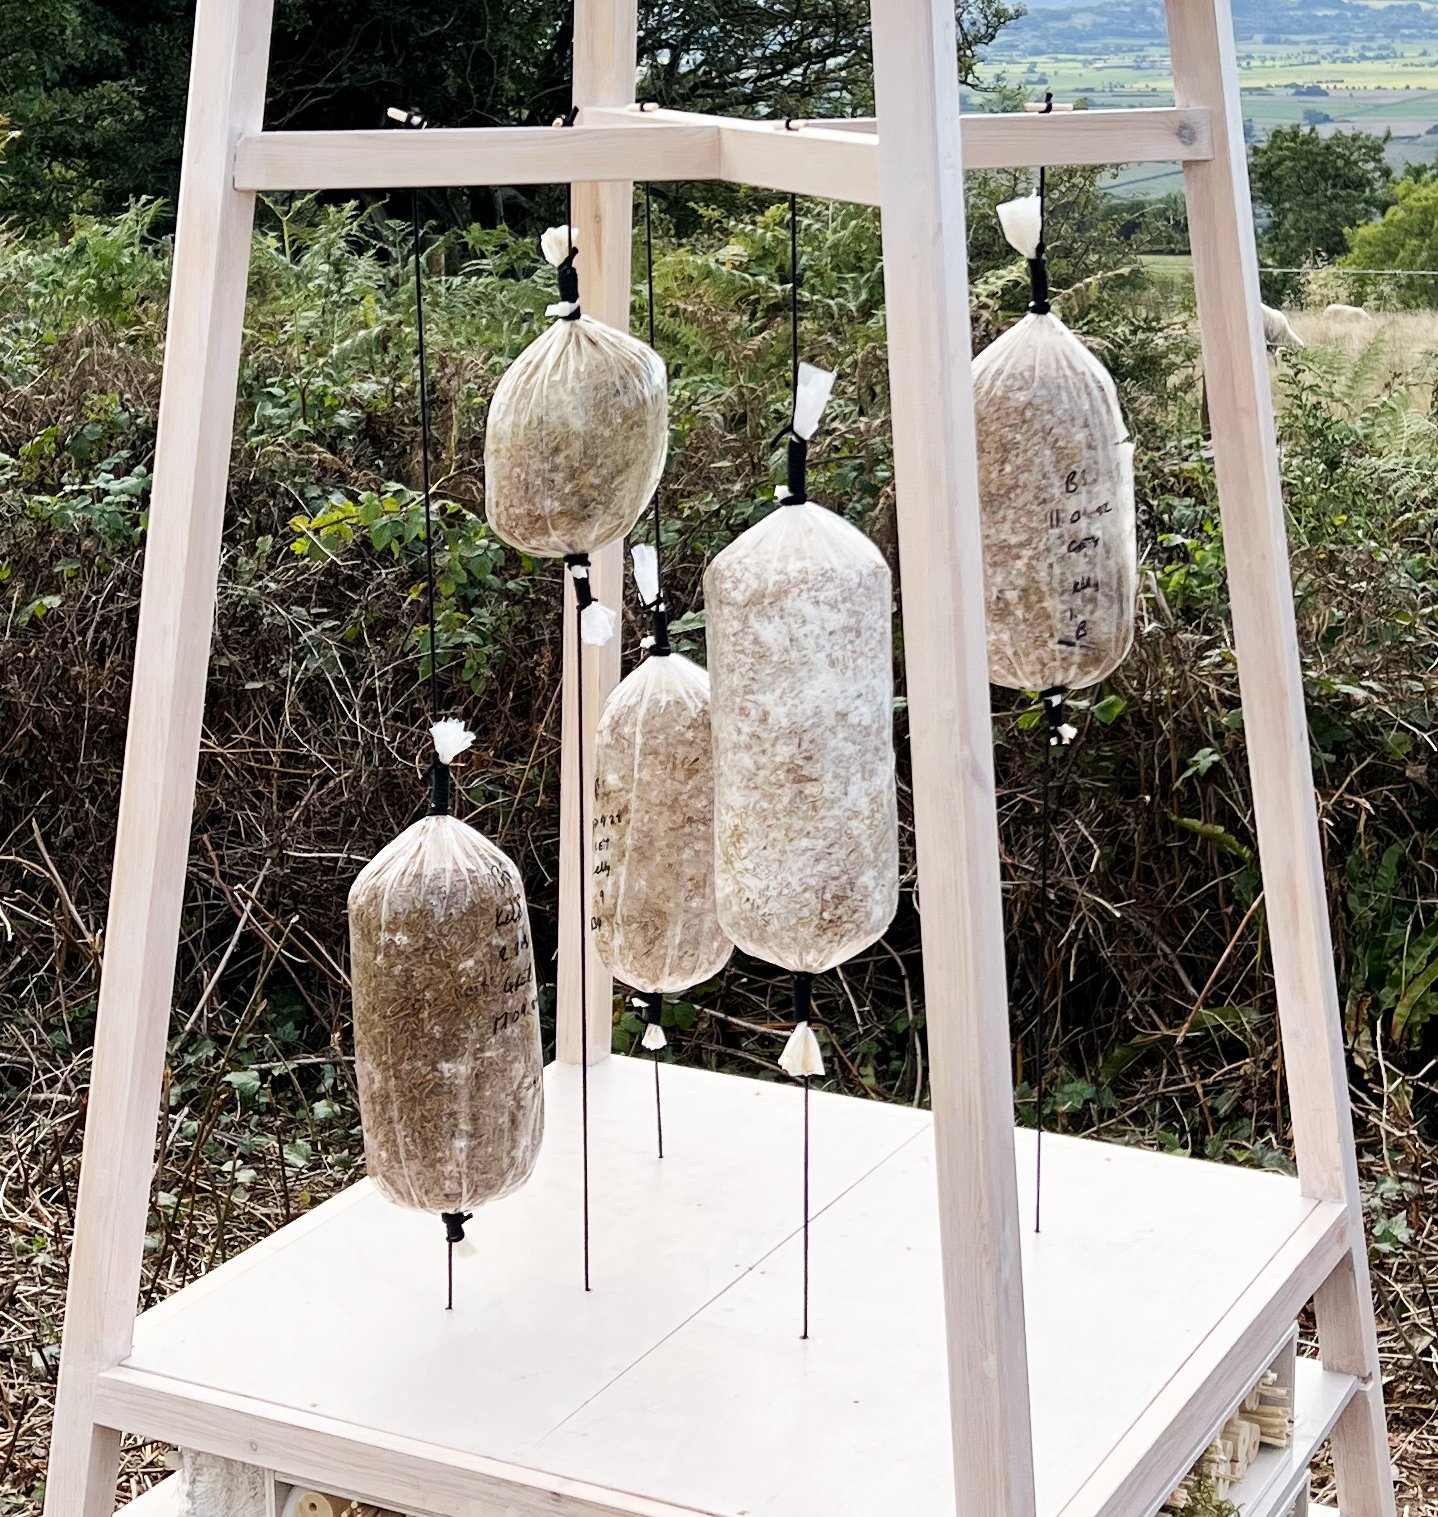  Kelly M O'Brien, Pollinator Sanctuary for Somerset Art Weeks 2022 at Deer Leap Nature Reserve (installation view) ©2022 